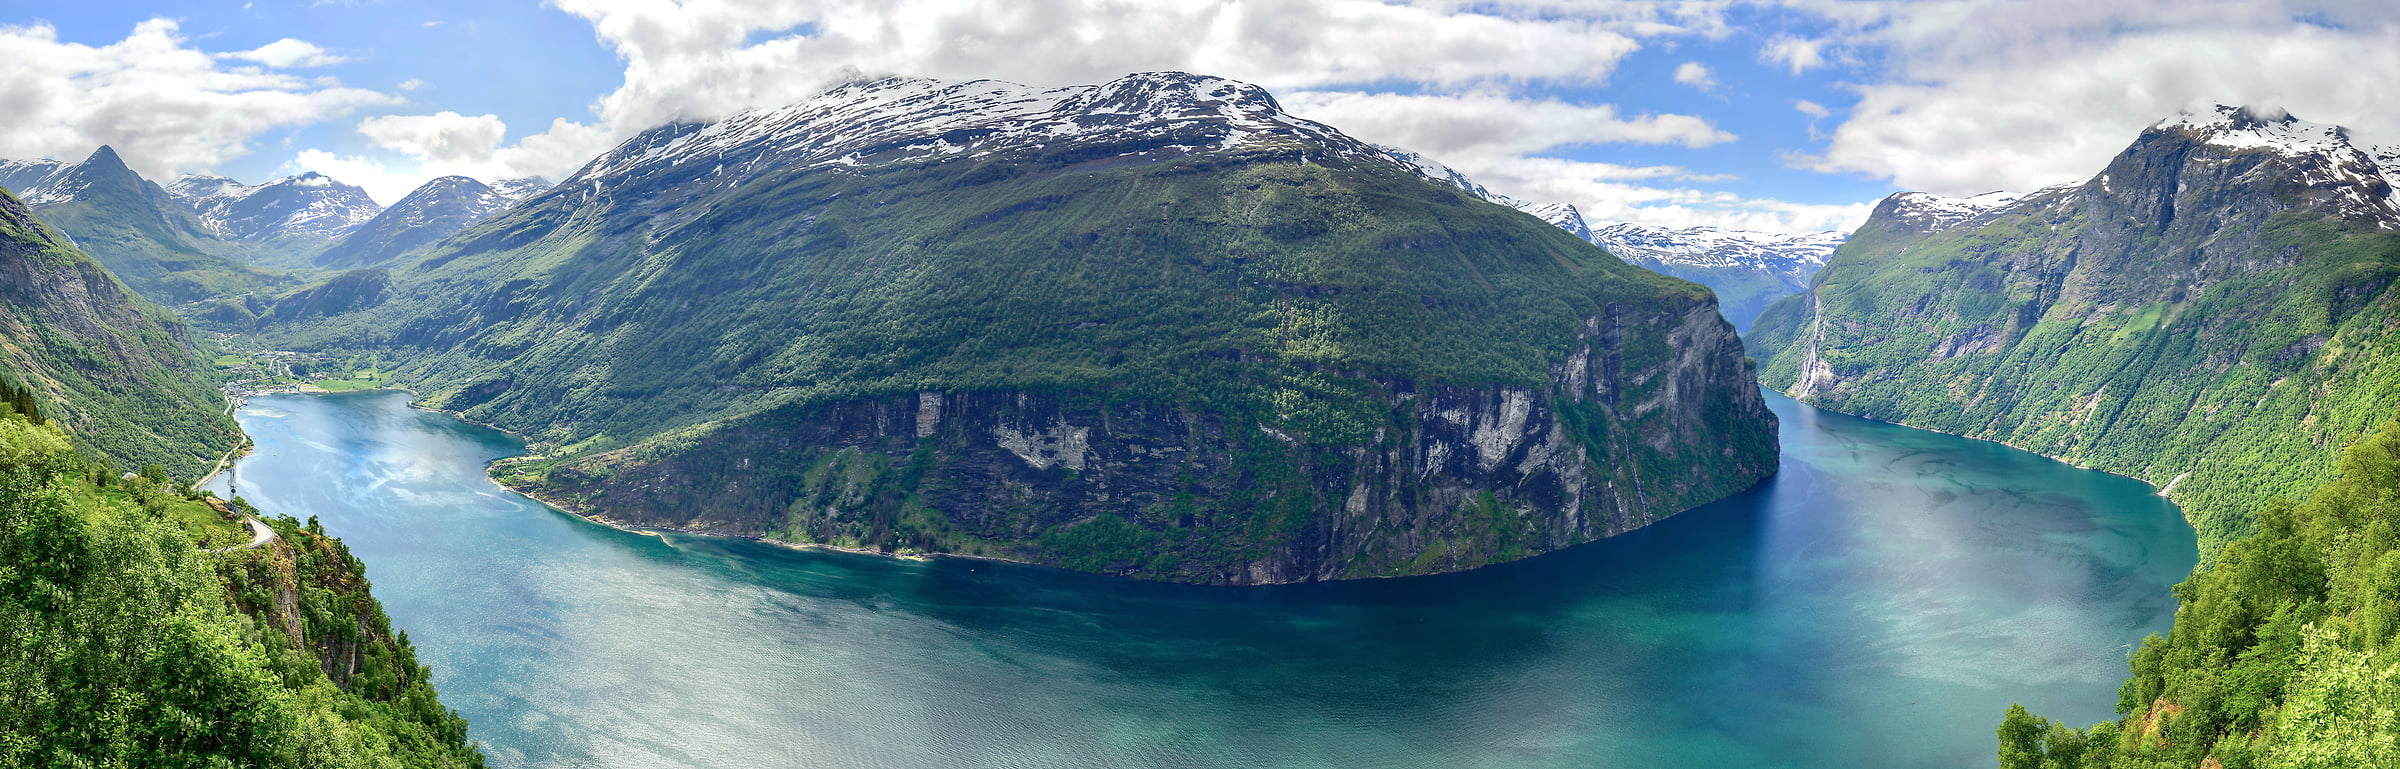 386 megapixels! A very high quality, large-format landscape photo of the fjords and mountains in Norway; VAST photo print created by Justin Katz